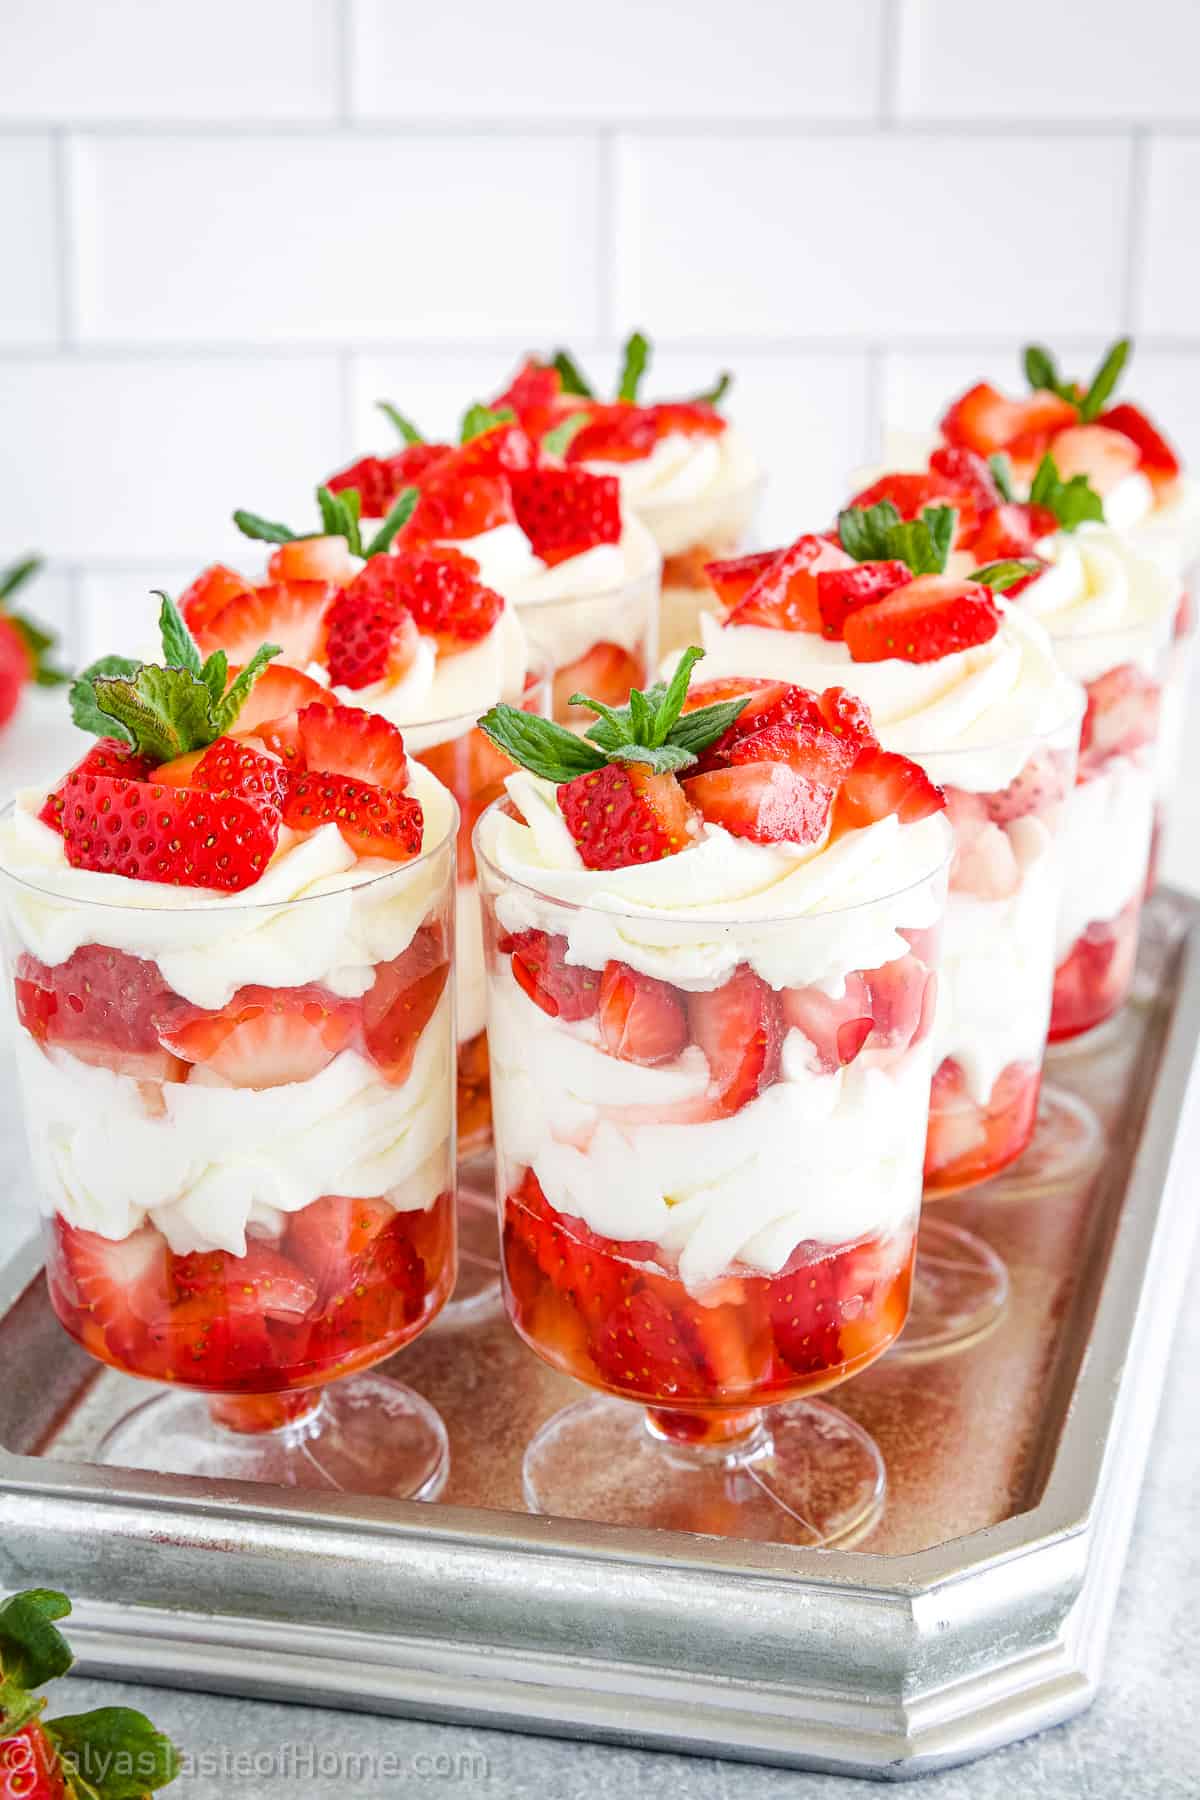 Strawberries and Cream is truly a light, refreshing, and delicious dessert that's perfect if you're looking for one of the best no-bake desserts out there!